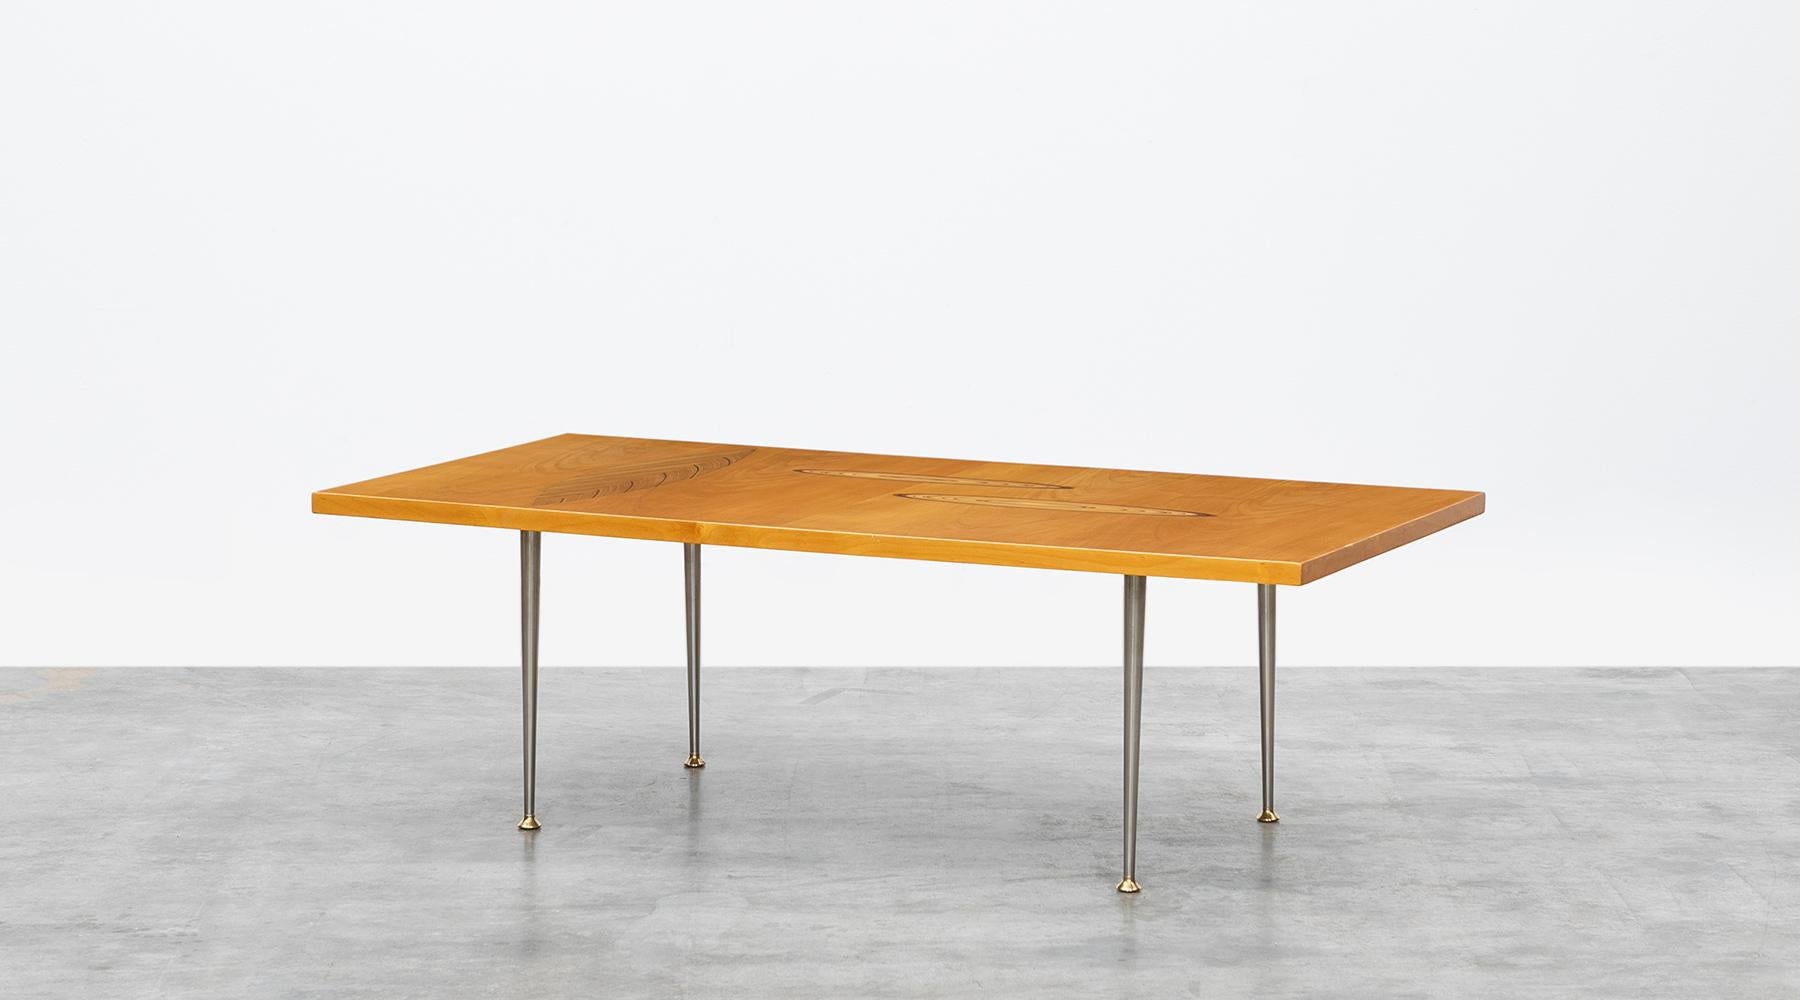 Veneered table top, metal base, Tapio Wirkkala for Asko, Finland, 1958.

Fantastic coffee table designed by Tapio Wirkkala in 1958. The veneered table top comes with a three wooden inlays in leaf ornament on a metal base. Manufactured by